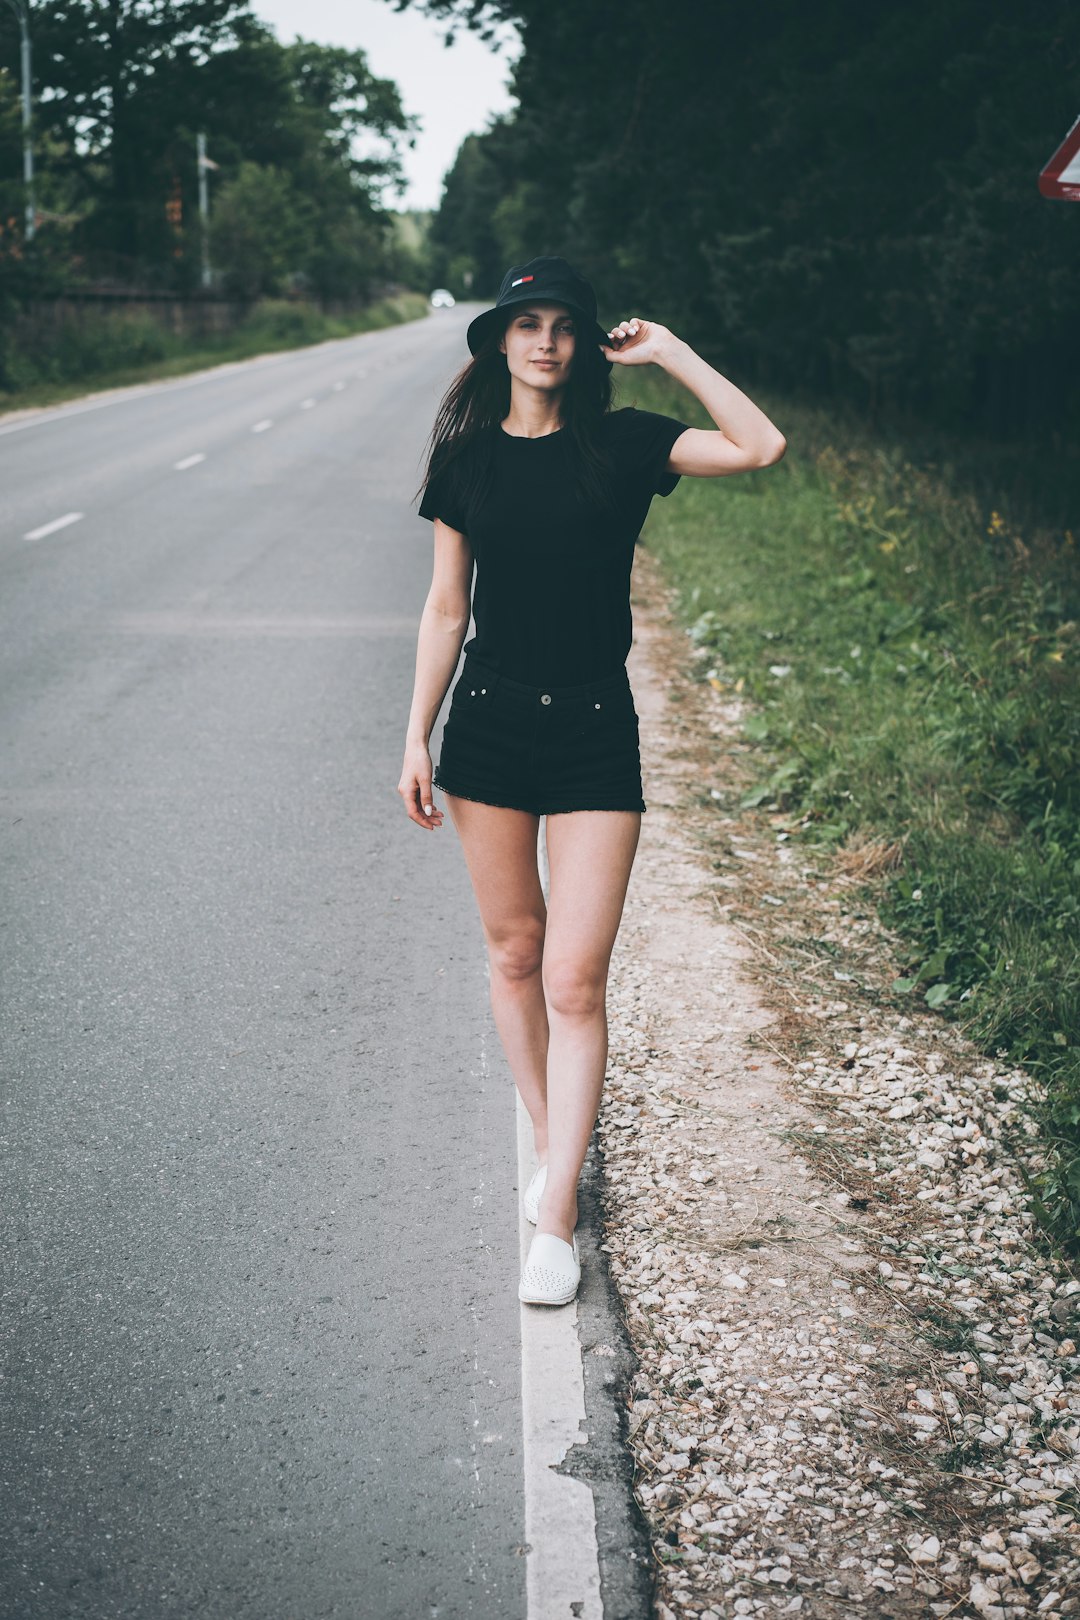 woman in black crew neck t-shirt and black shorts walking on gray asphalt road during